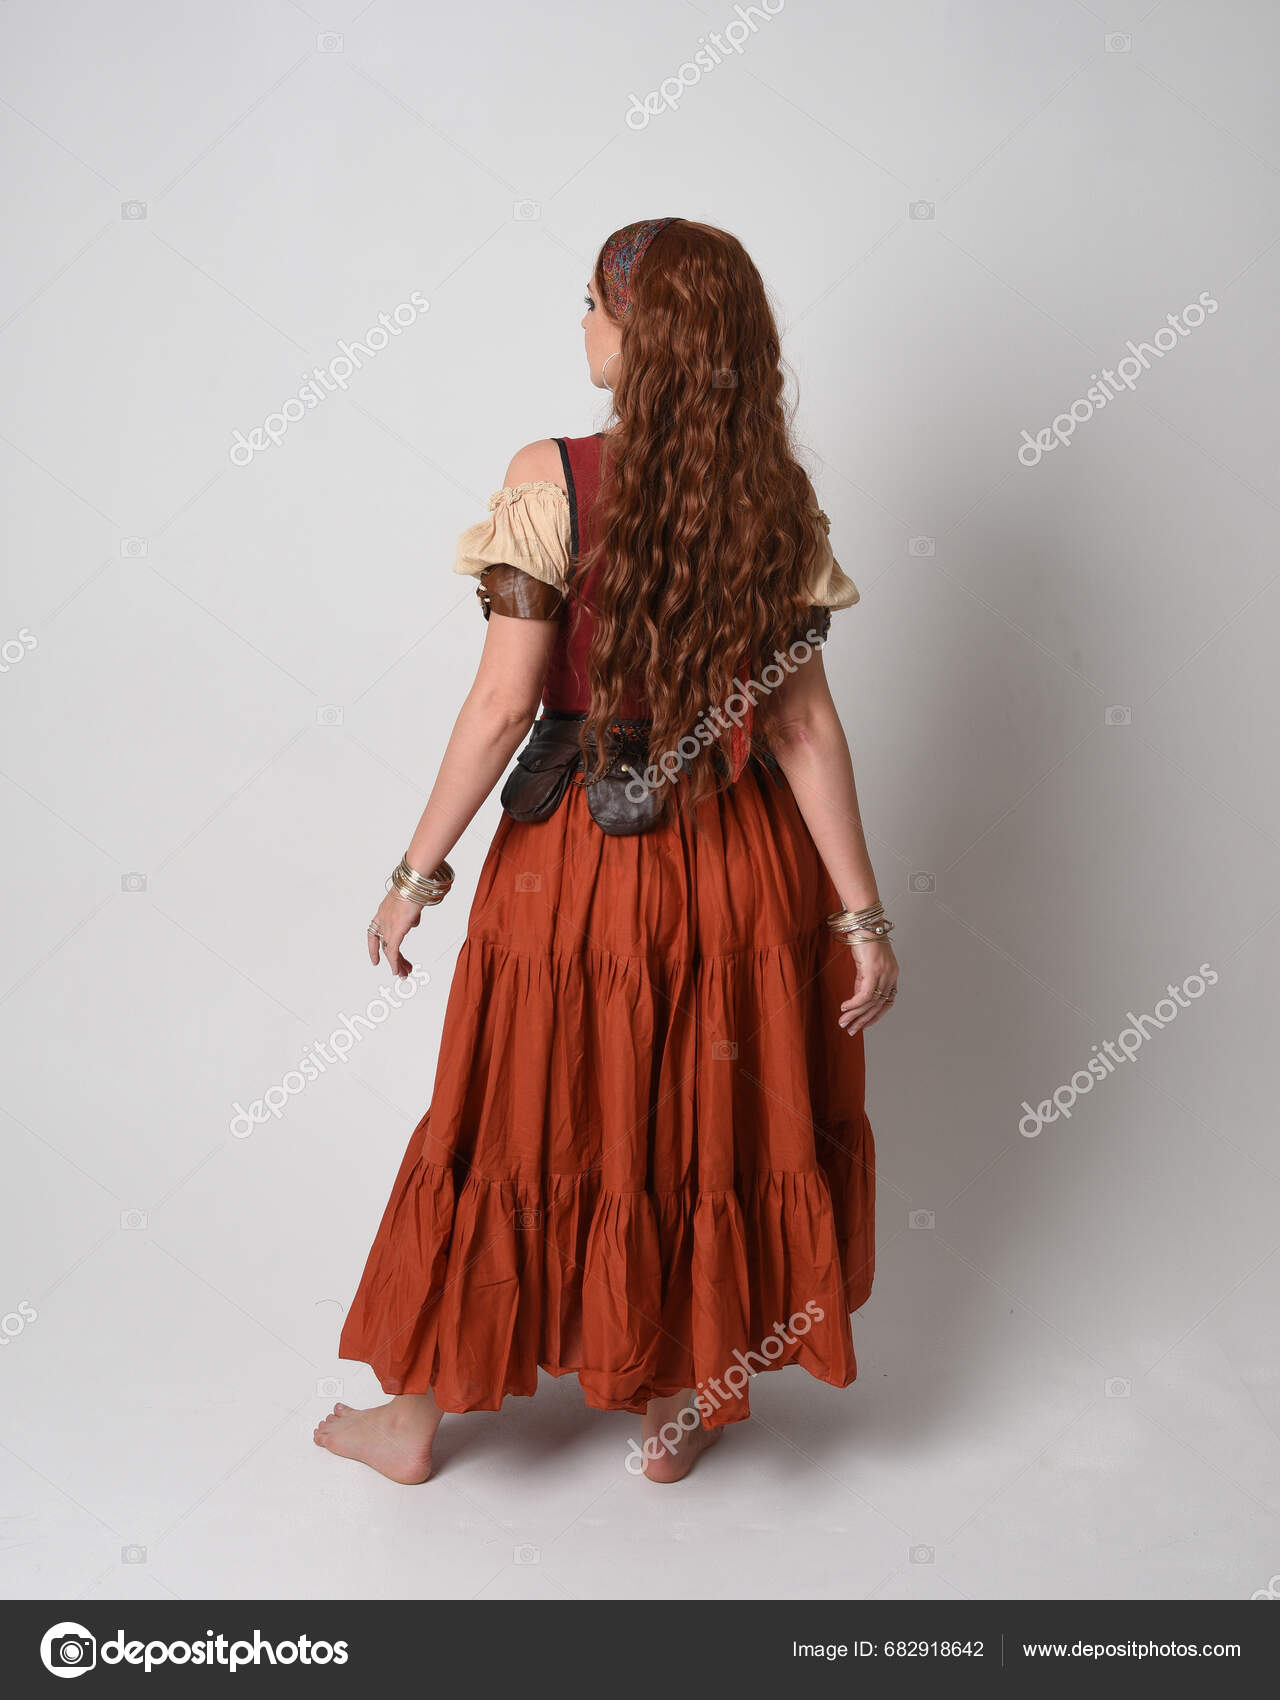 Images Brown haired Pose young woman Asiatic frock 640x960